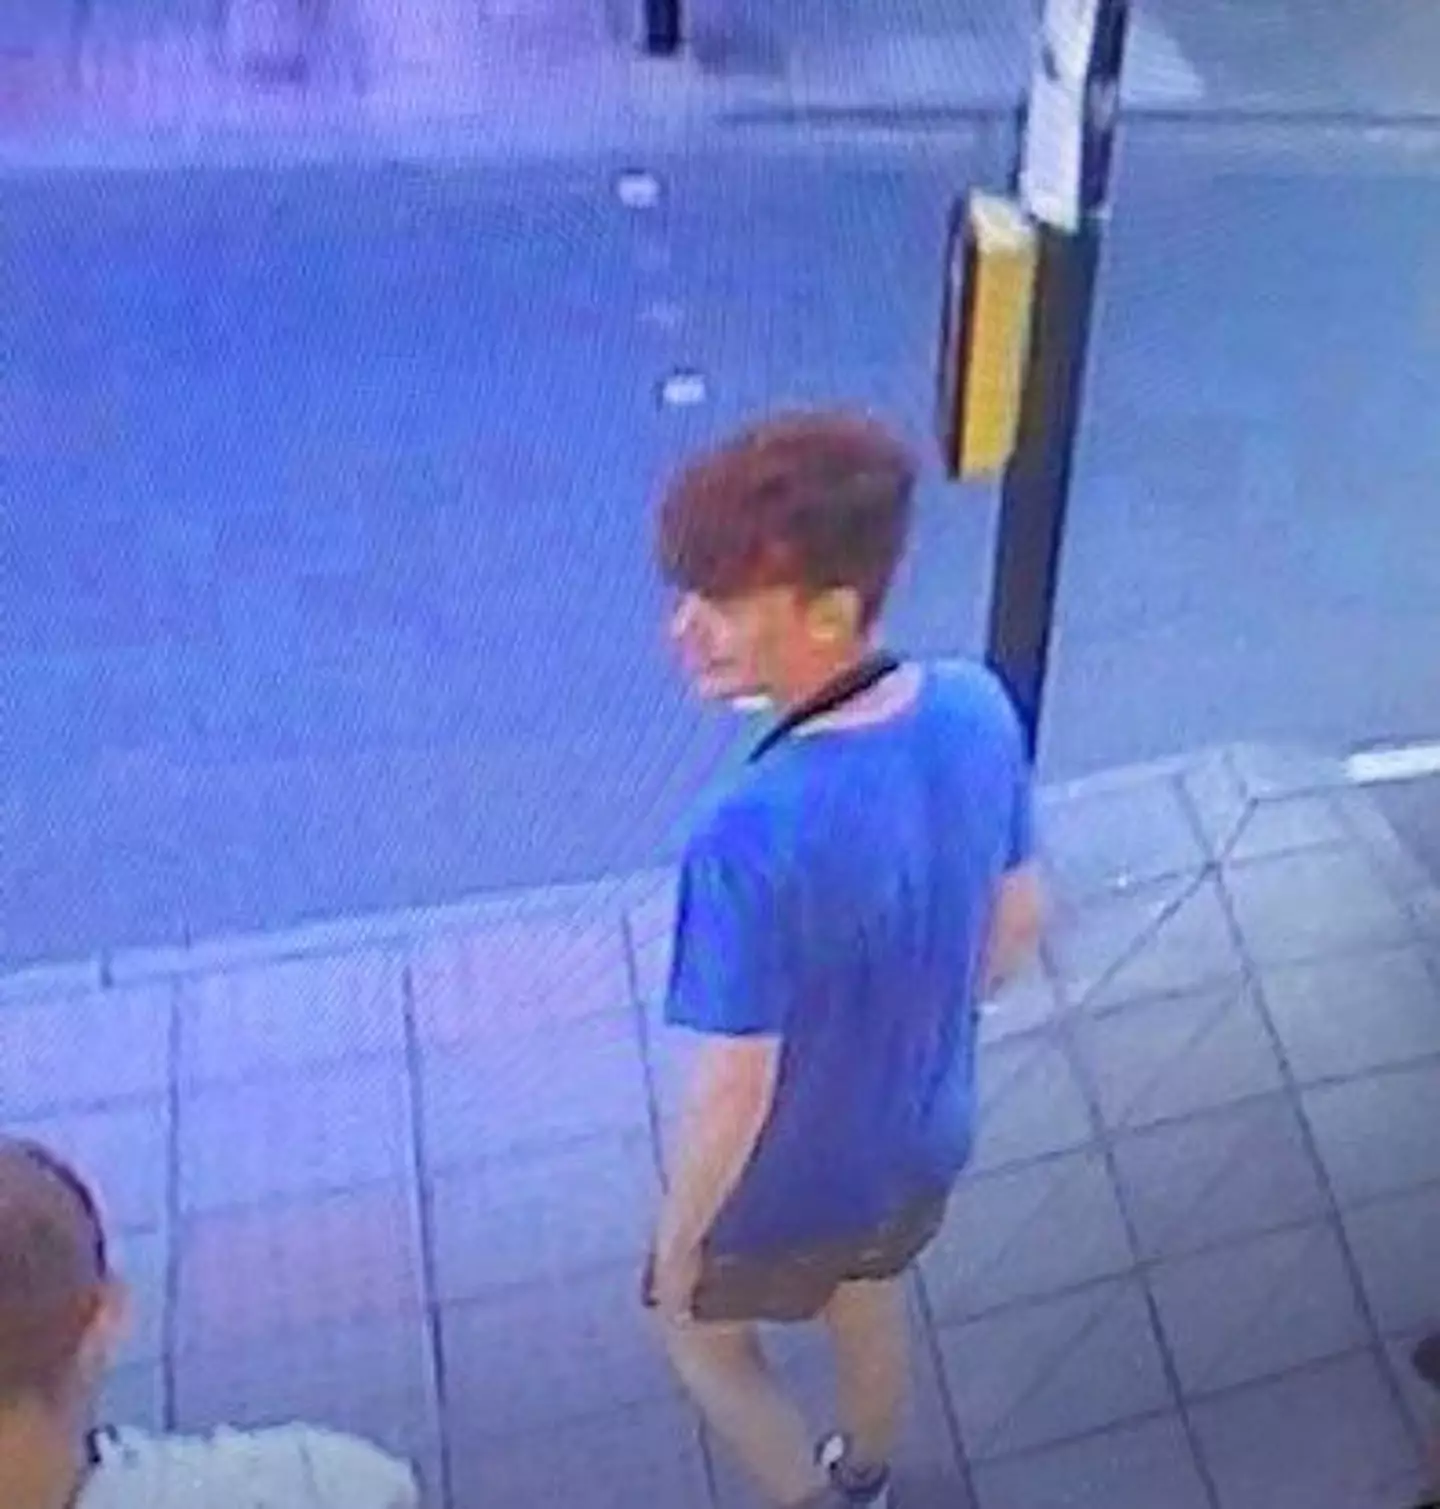 Police are appealing for help identifying the youths.